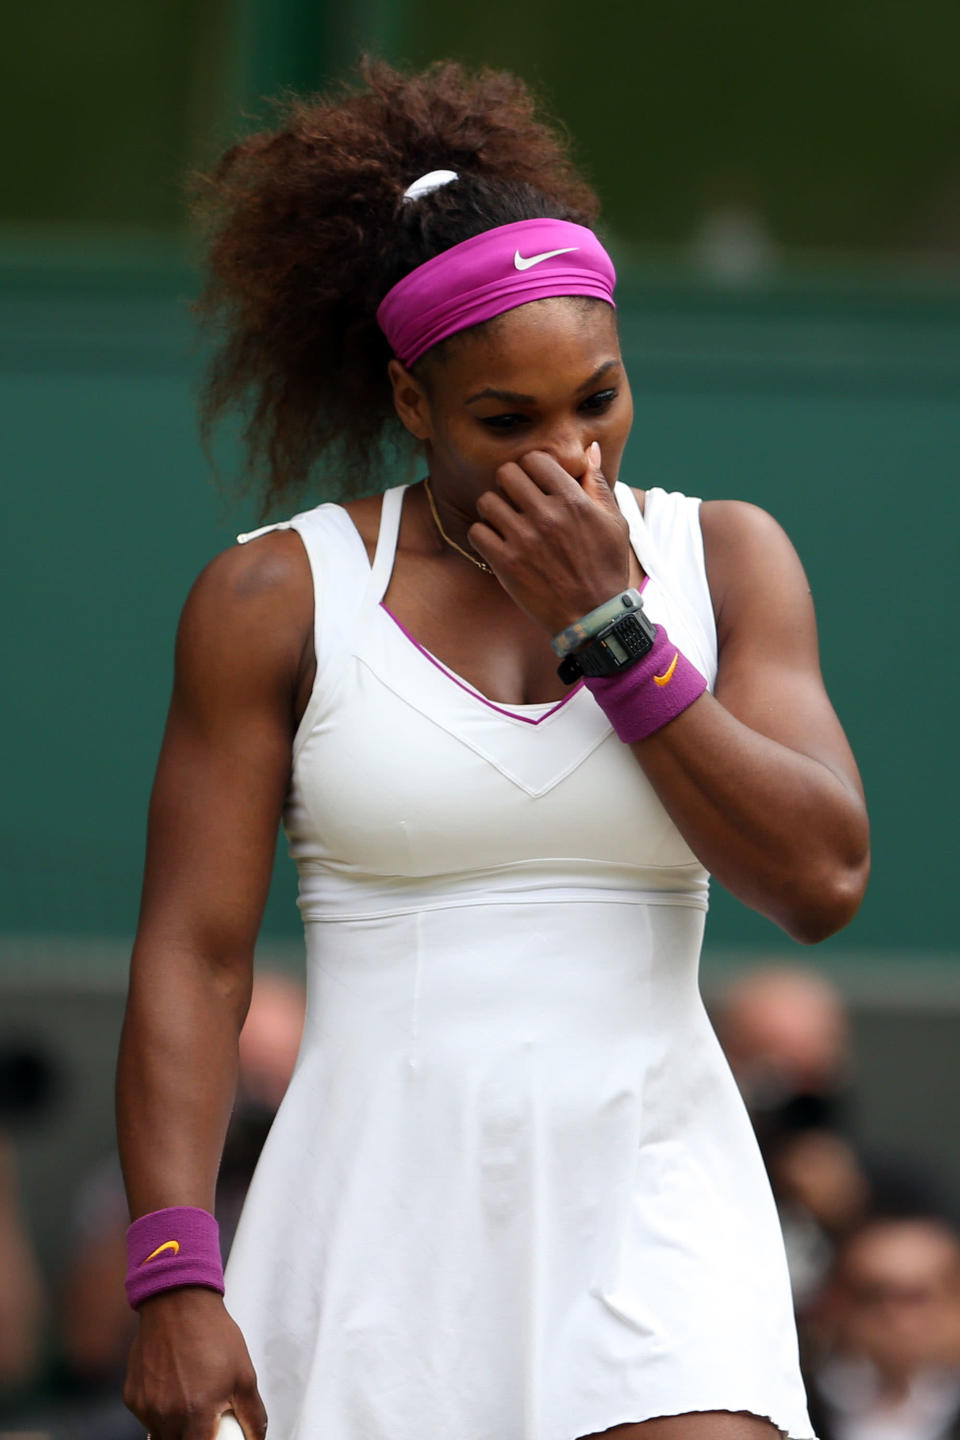 Serena Williams of the USA shows her frustration during her Ladies Singles final match against Agnieszka Radwanska of Poland on day twelve of the Wimbledon Lawn Tennis Championships at the All England Lawn Tennis and Croquet Club on July 7, 2012 in London, England. (Photo by Julian Finney/Getty Images)